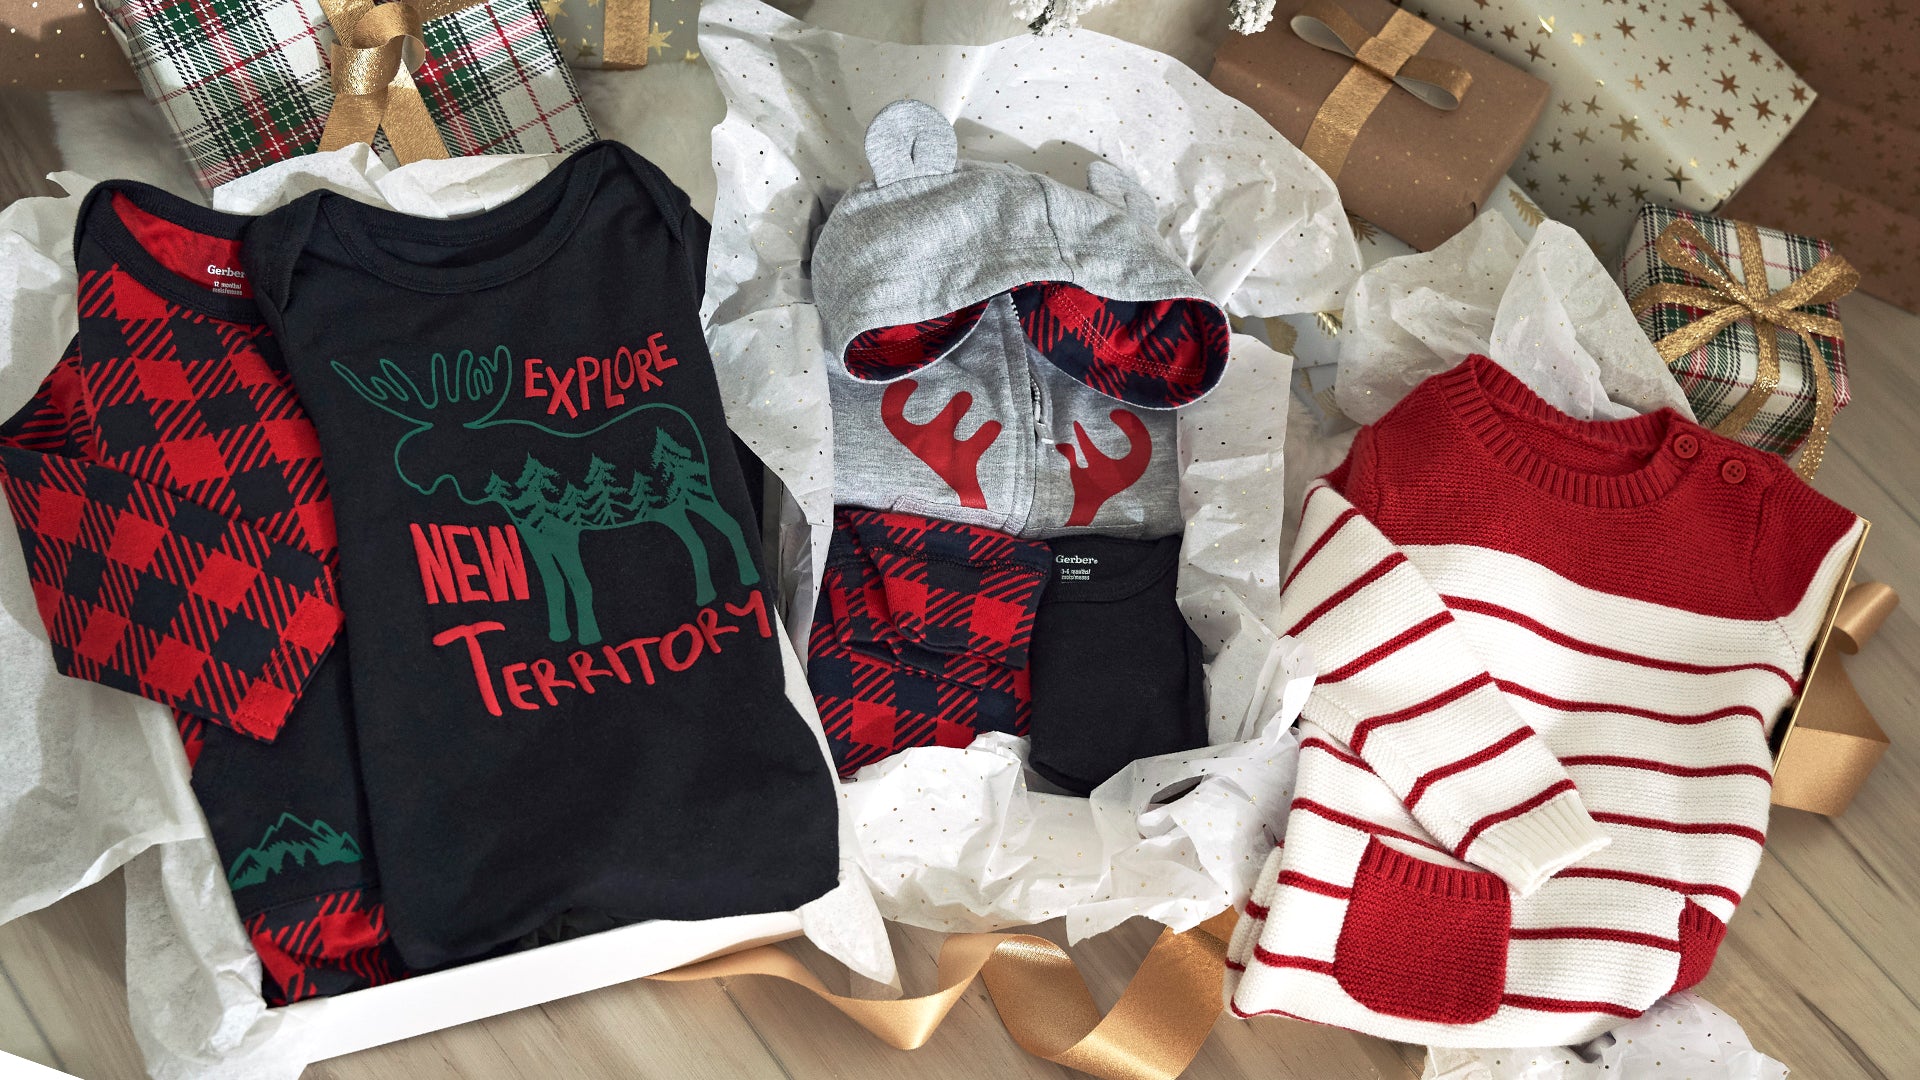 Get your little ones ready for the holidays with this gift set of toddler and baby clothing, including a red and black plaid shirt, a red and white striped shirt, and a red and white striped sweater.